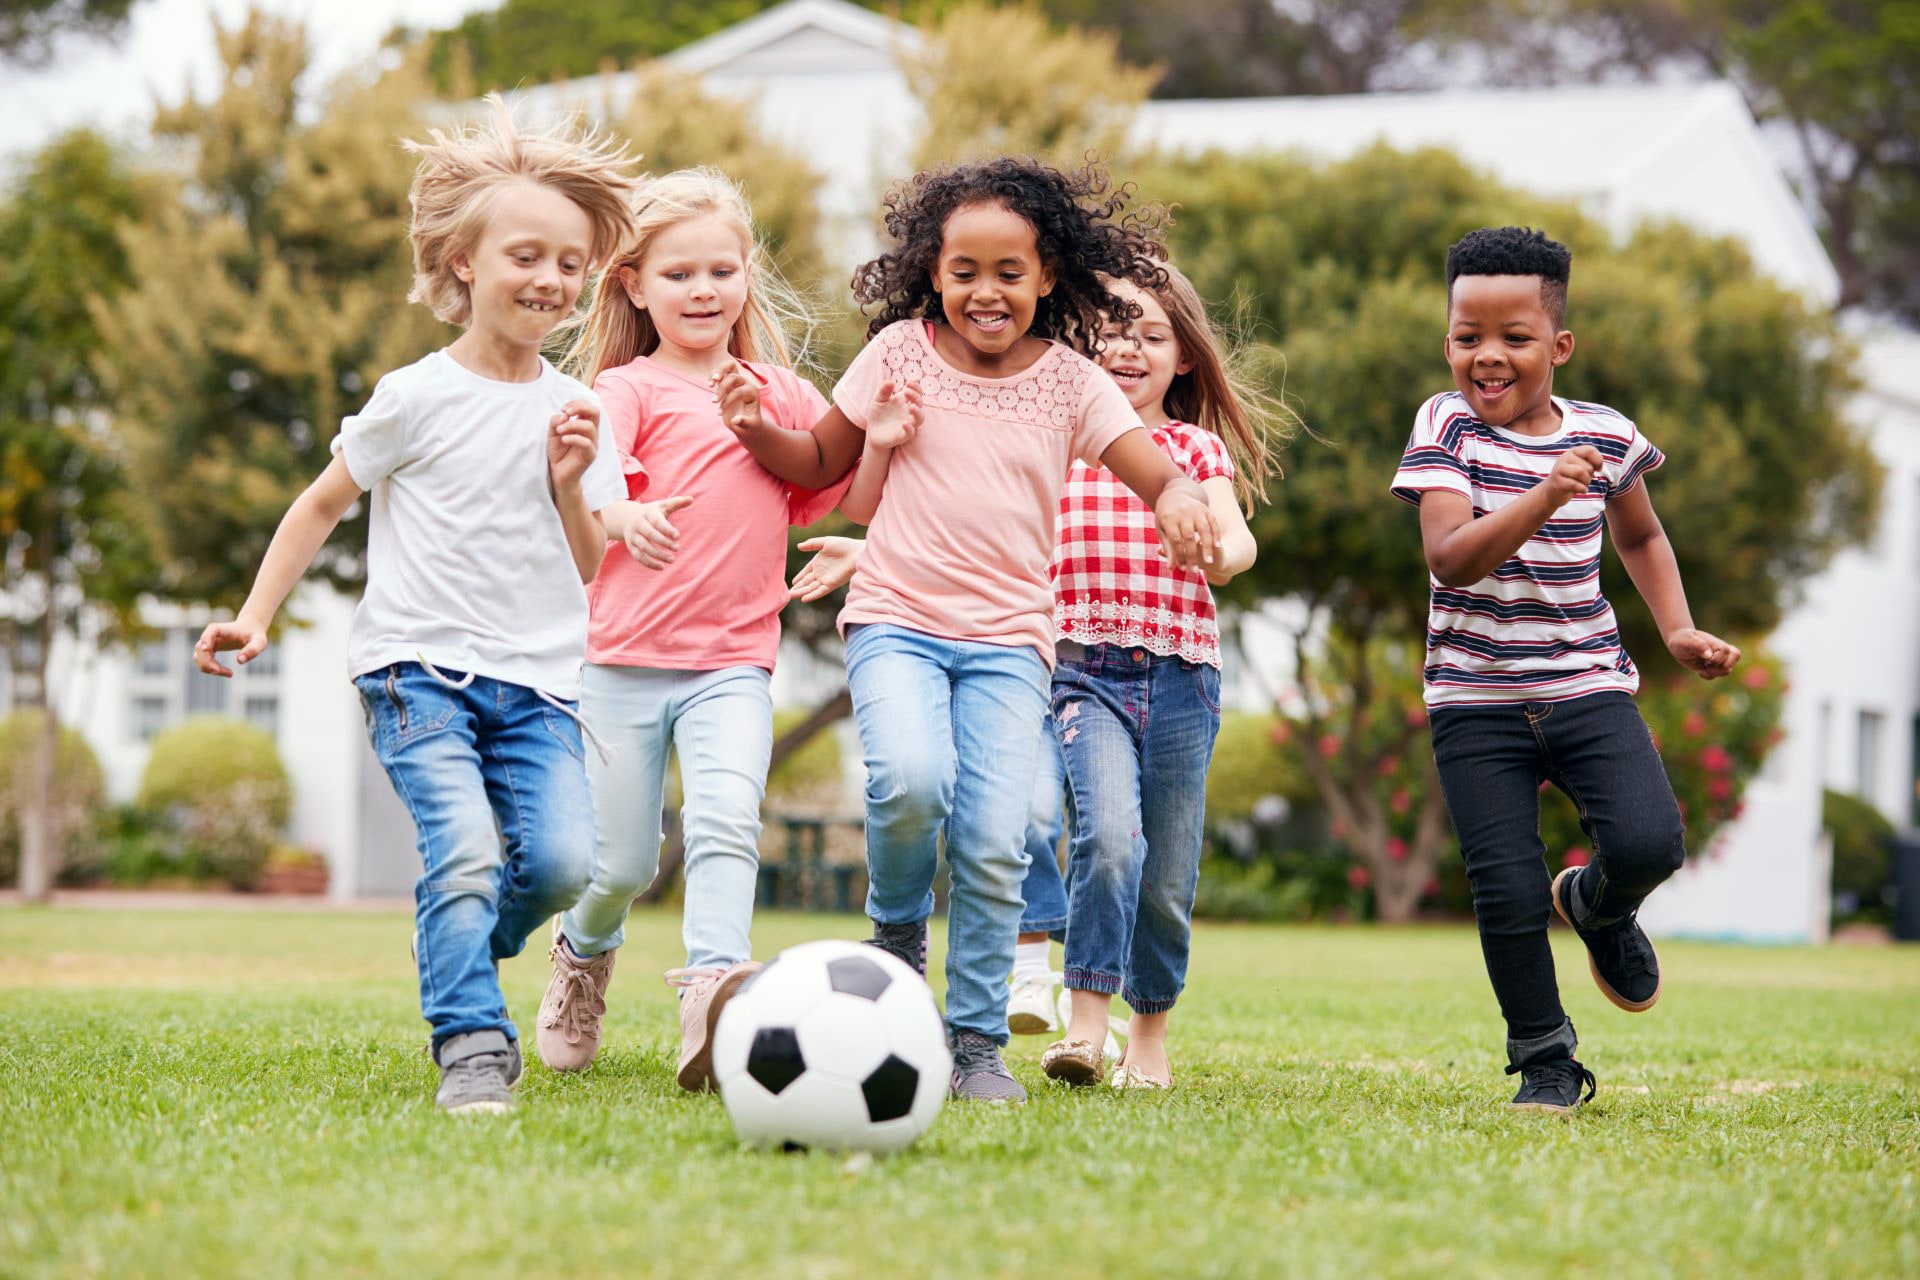 10 Easy Games Like Simon Says - Empowered Parents